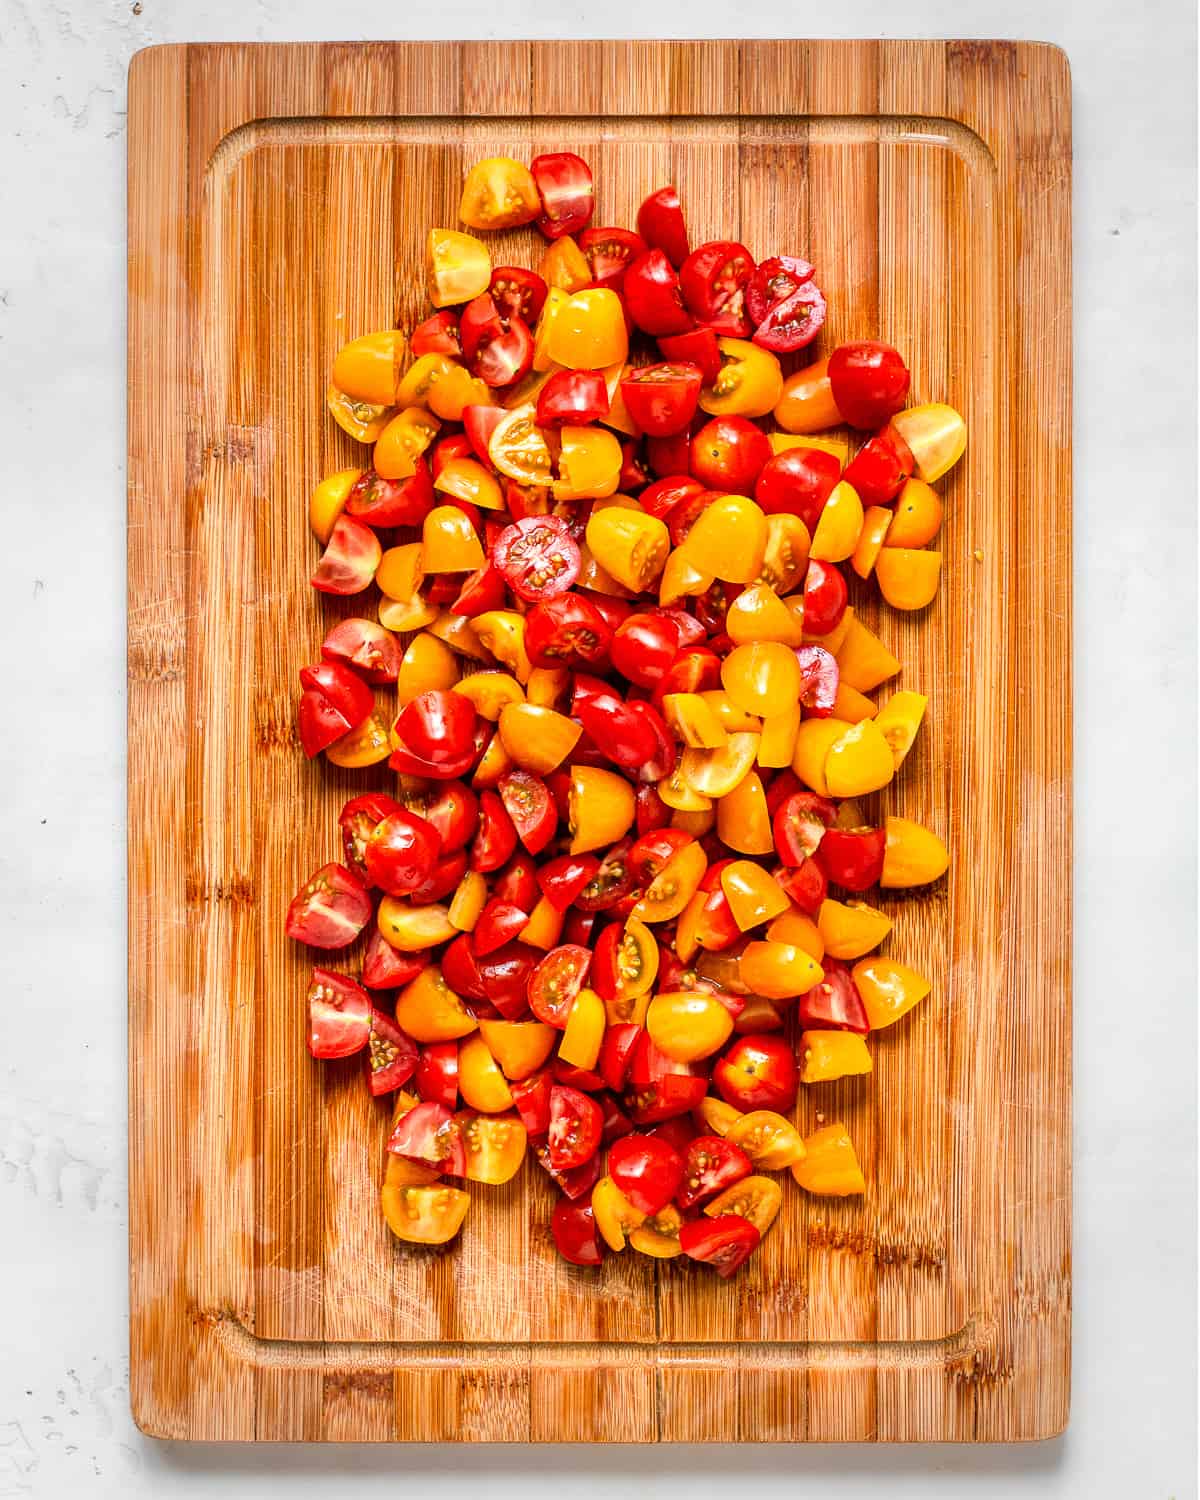 Chopped red and yellow cherry tomatoes on a wooden cutting board.